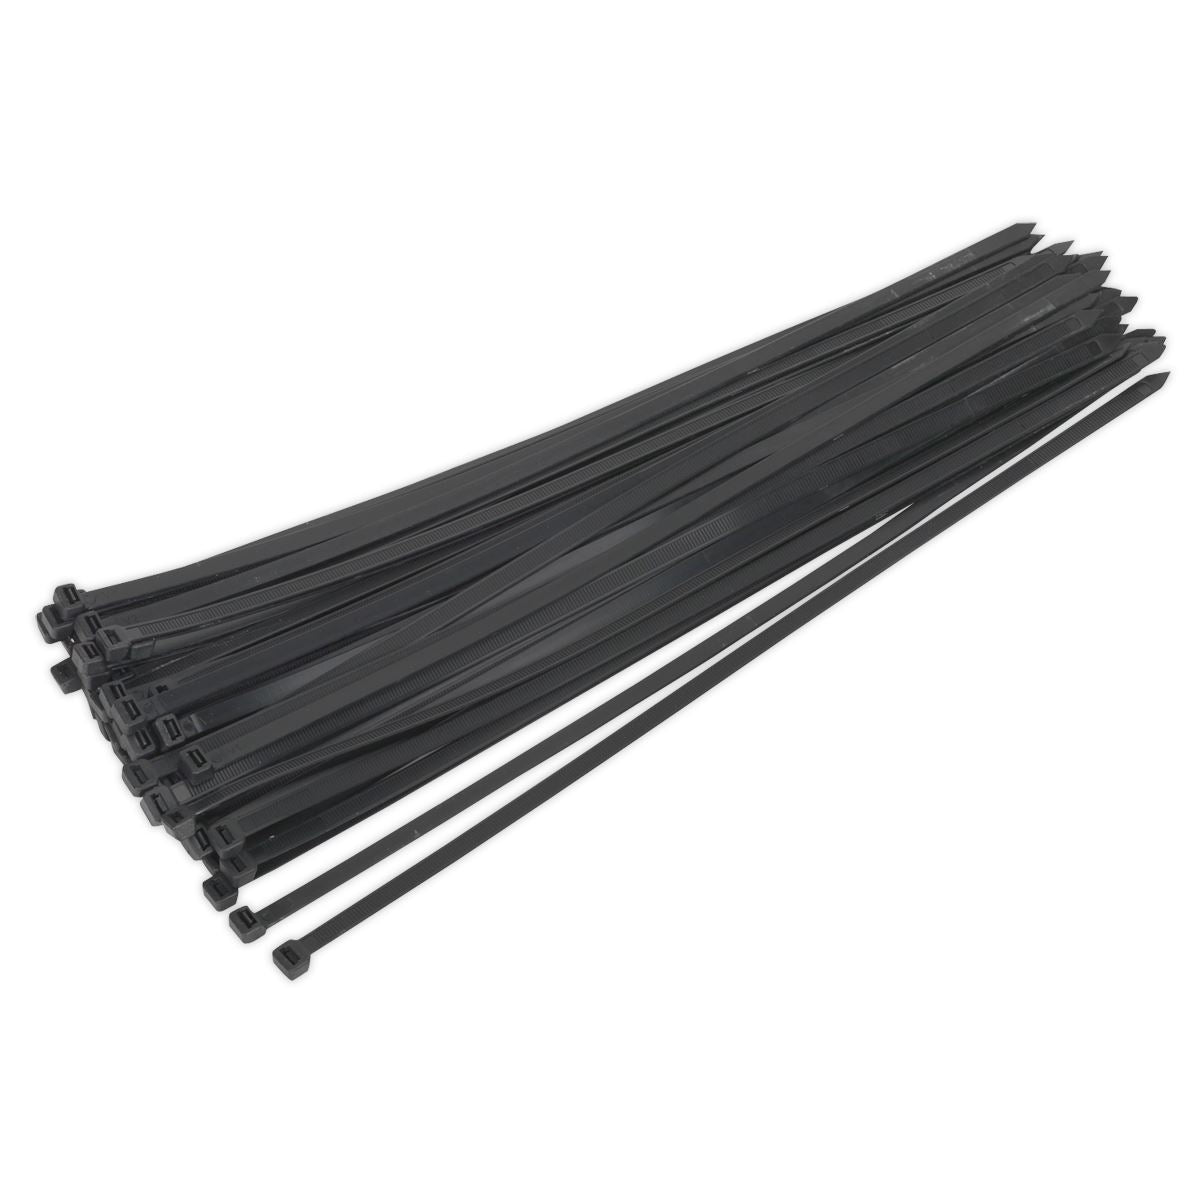 Sealey Cable Tie 650 x 12mm Black Pack of 50